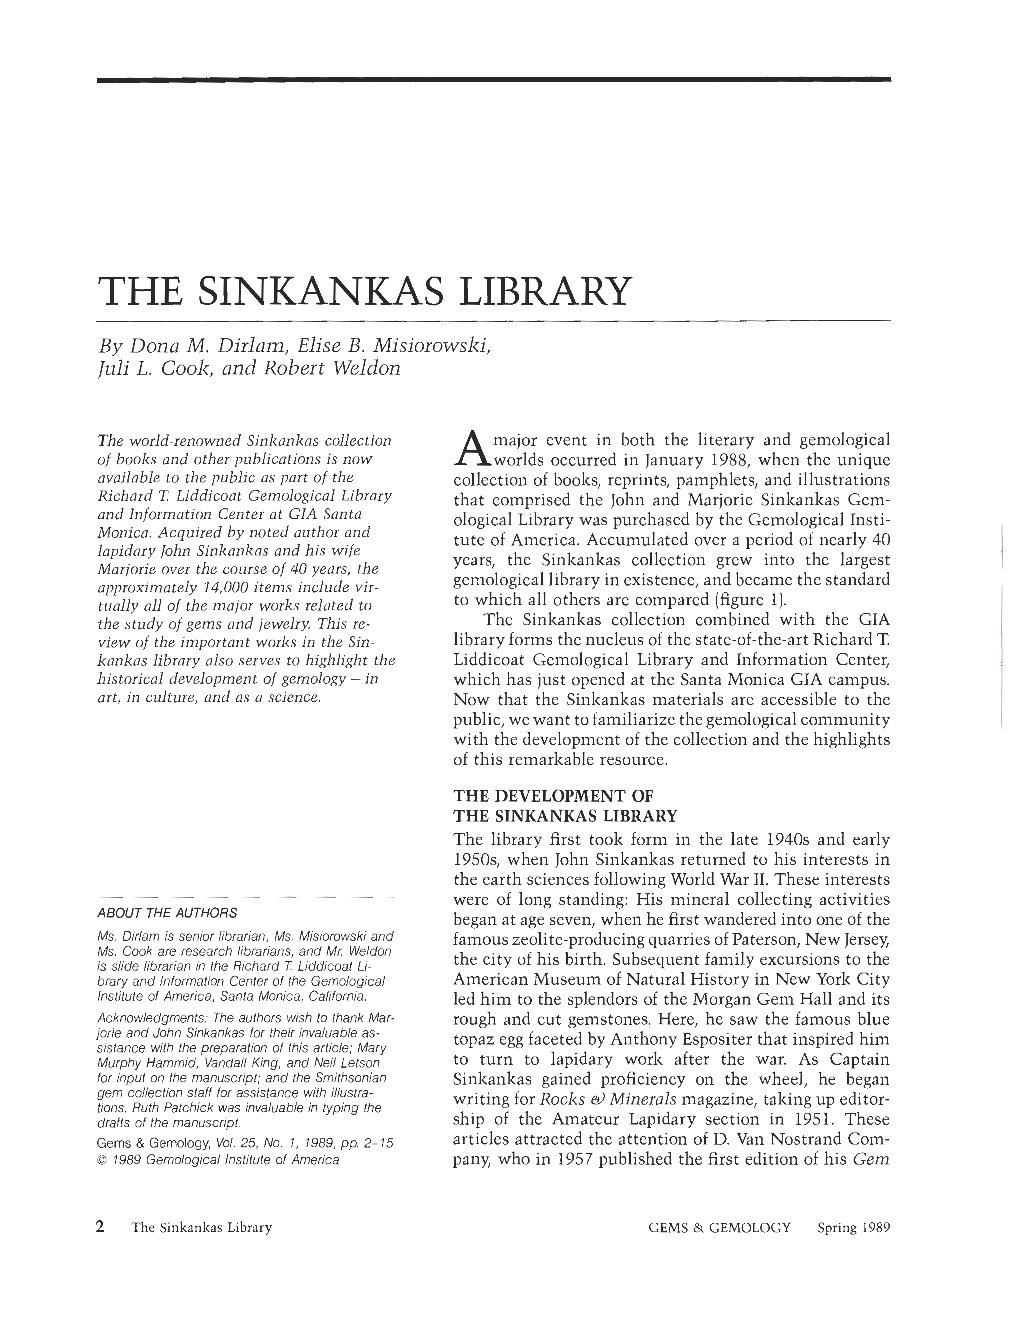 THE SINKANKAS LIBRARY by Dona M